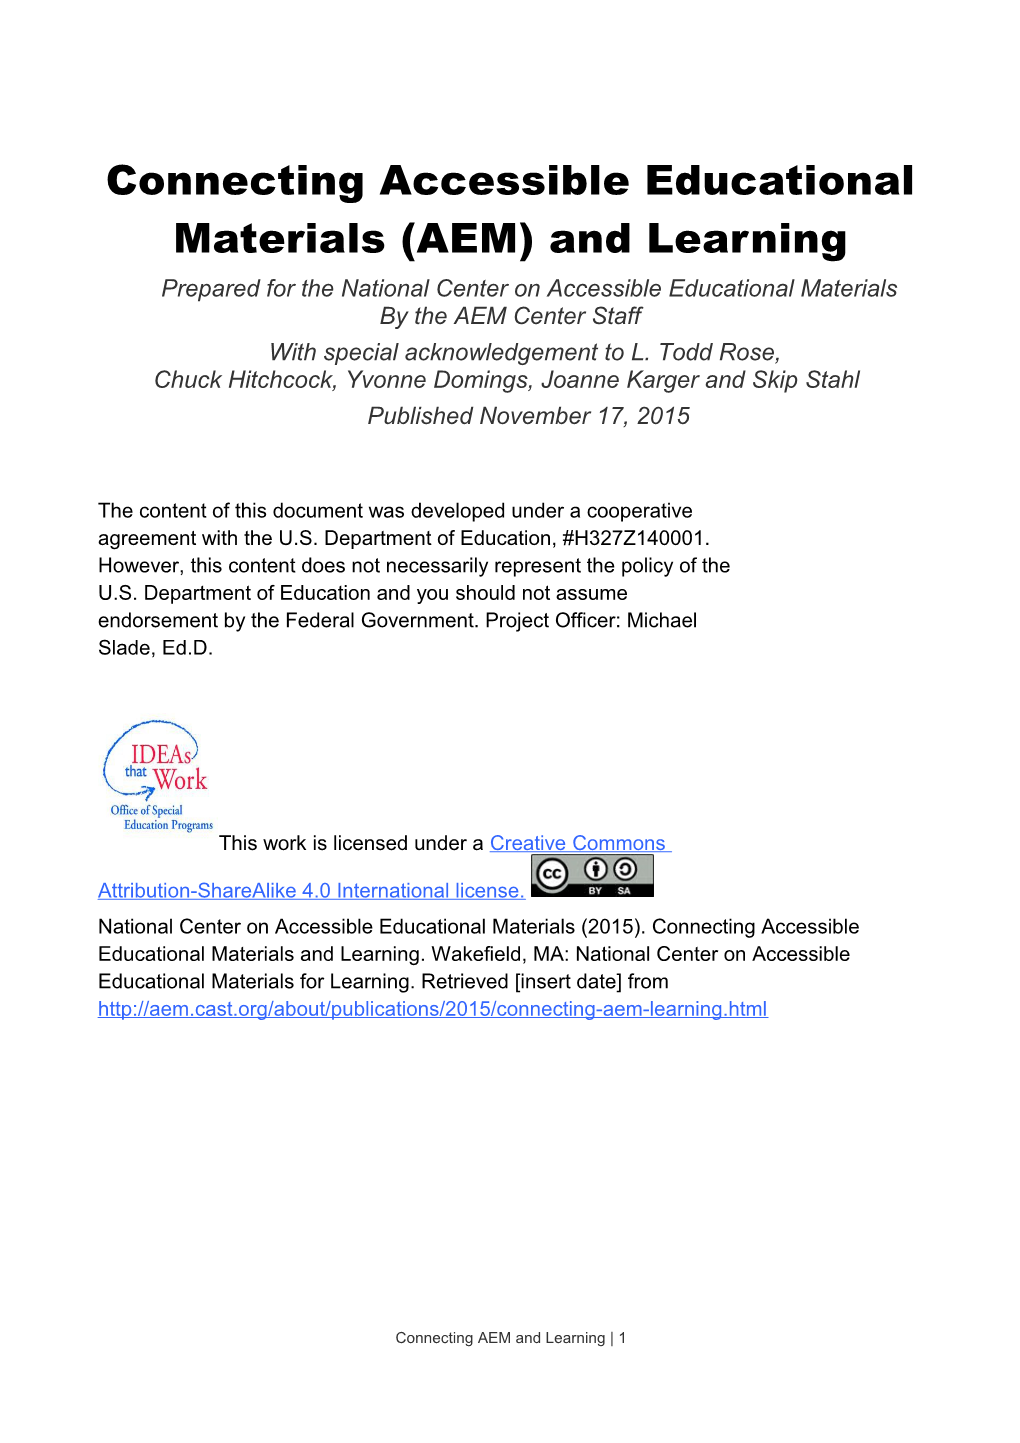 AEM and Learning